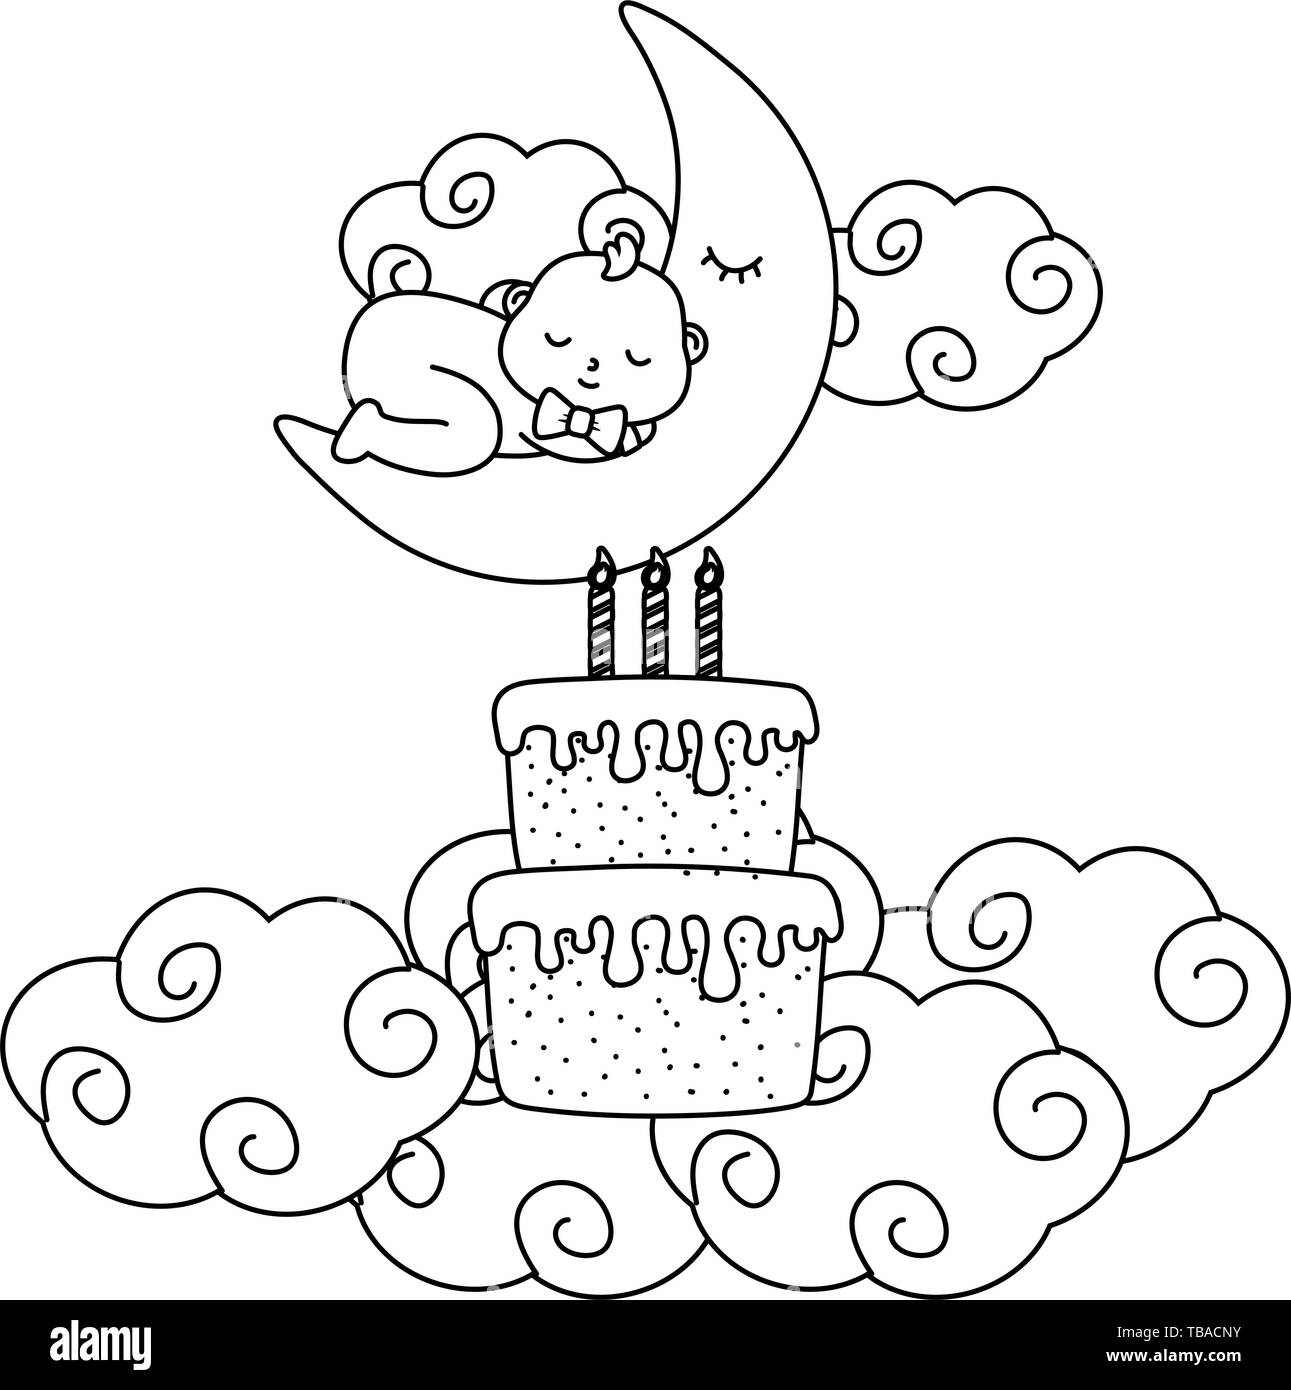 baby sleeping on the moon with cake and candles over clouds vector illustration graphic design Stock Vector